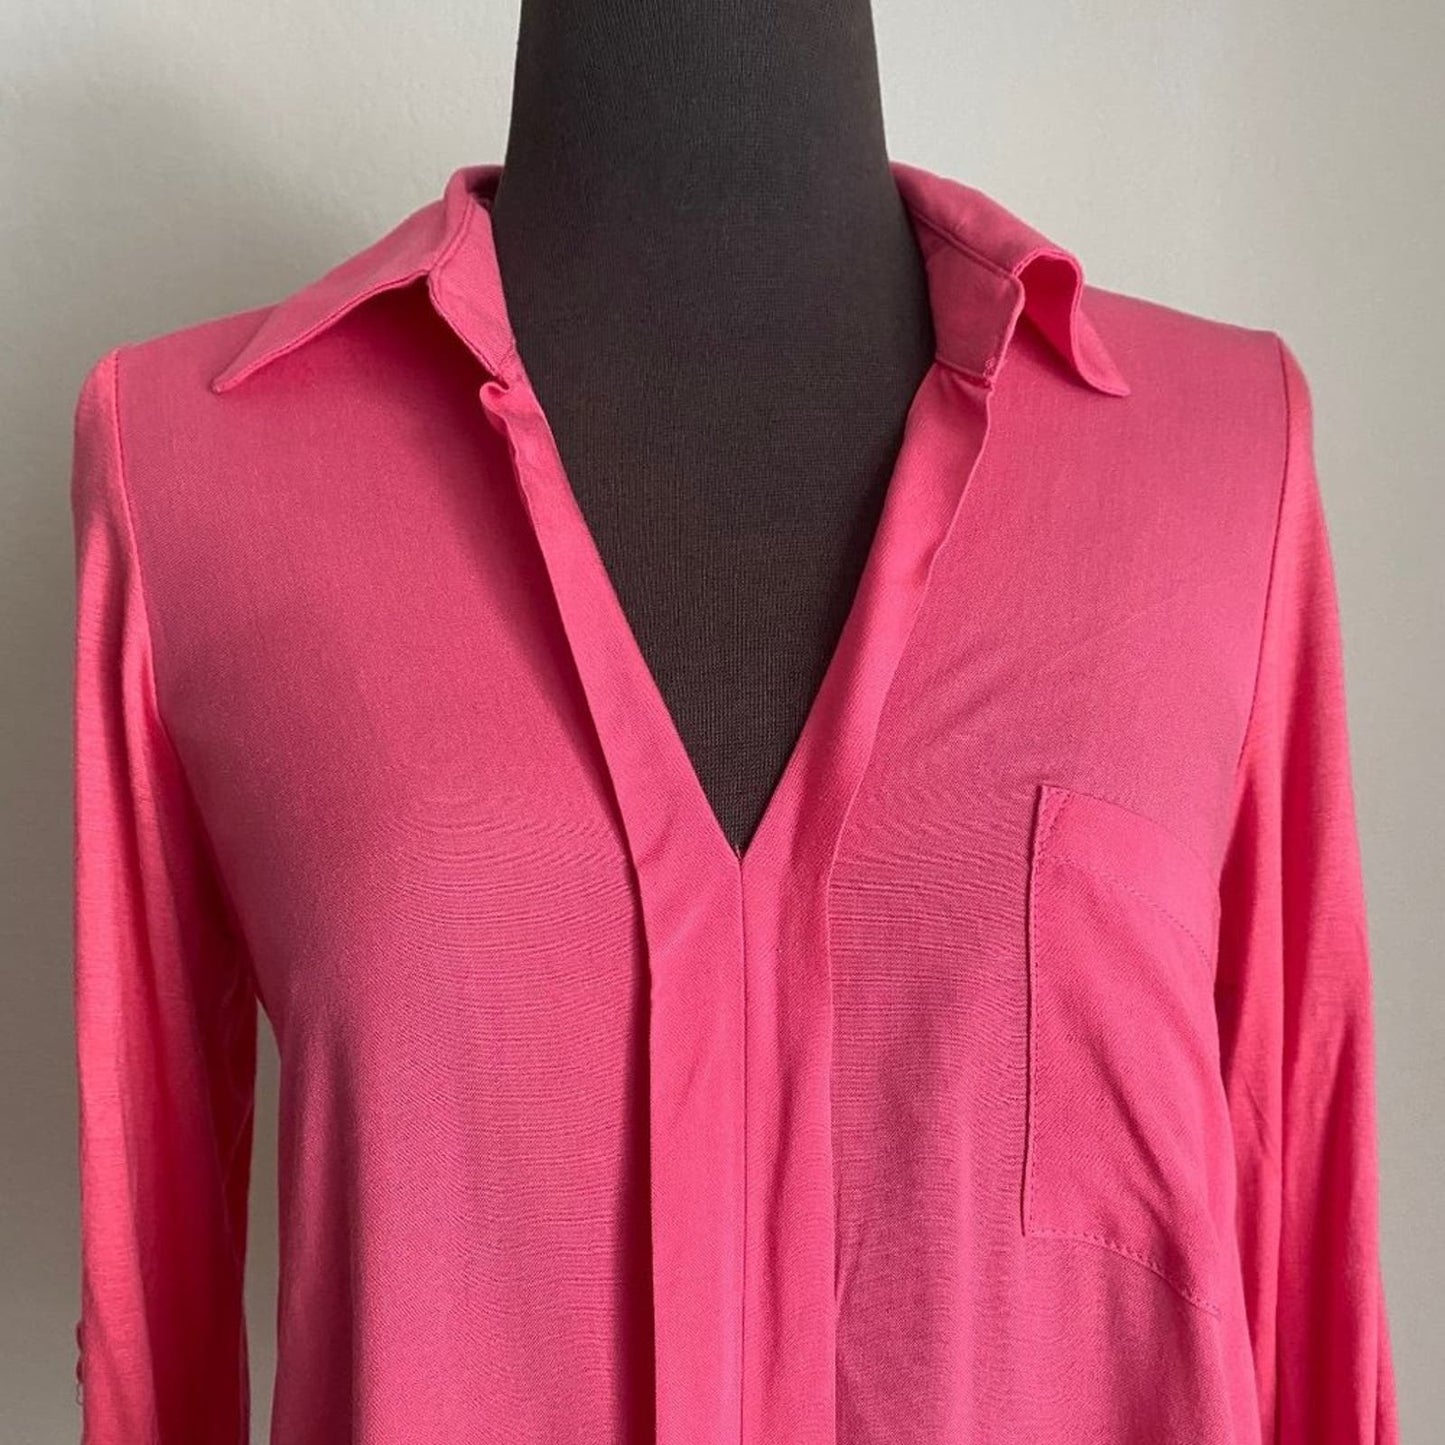 Pleione sz S hot pink collared v-neck work career blouse NWT